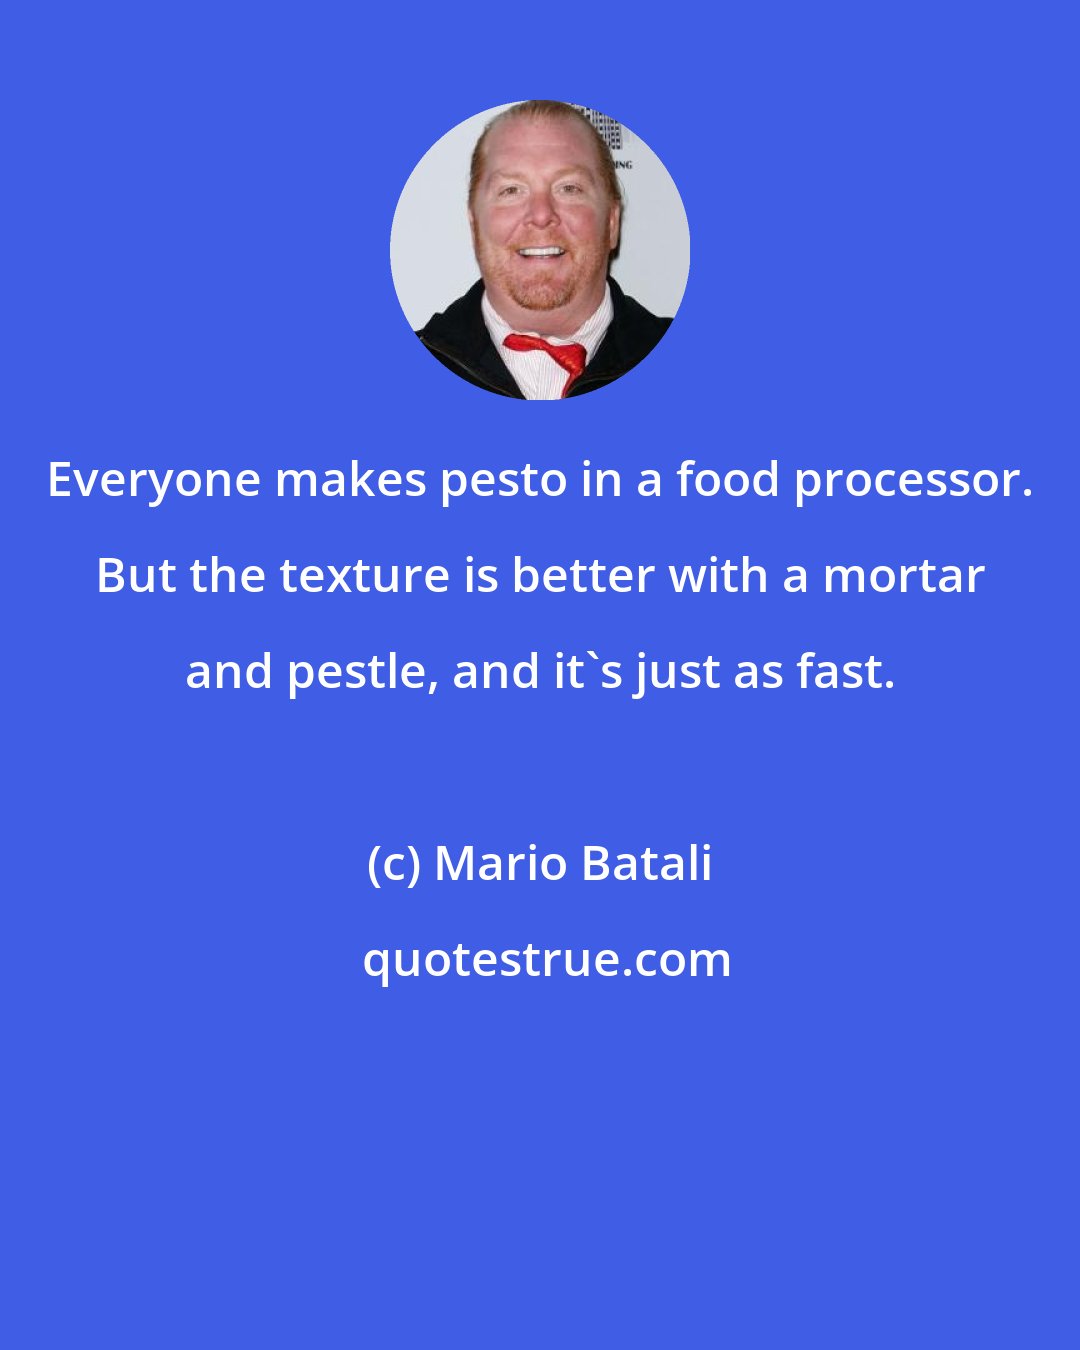 Mario Batali: Everyone makes pesto in a food processor. But the texture is better with a mortar and pestle, and it's just as fast.